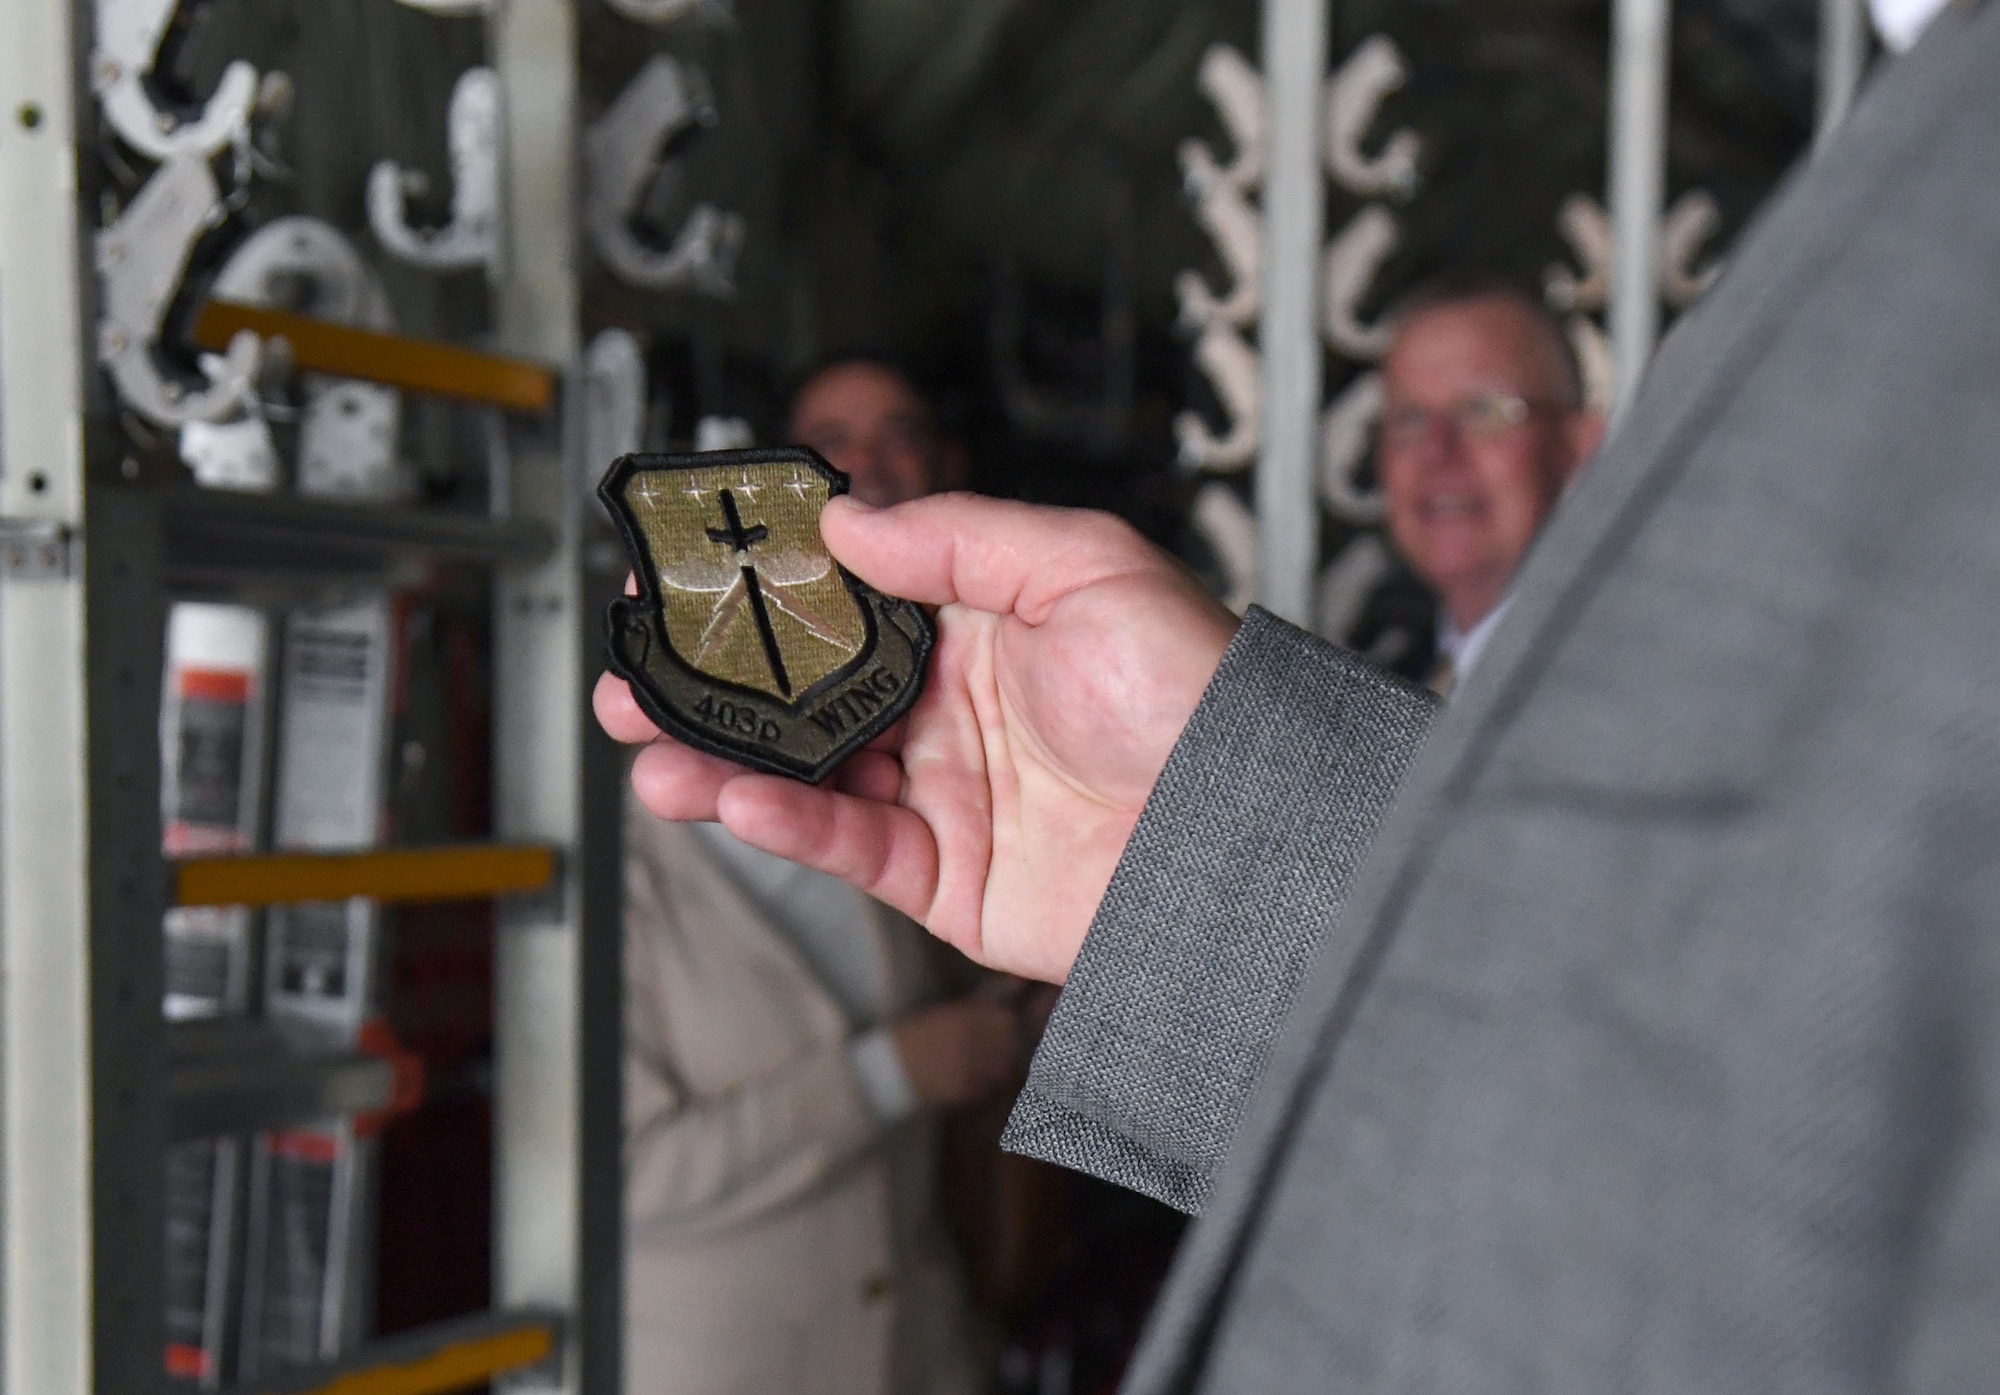 Matt Barnett, Office of Congressman Mike Ezell field representative, holds a 403rd Wing patch inside a C-130 aircraft during an immersion tour at Keesler Air Force Base, Mississippi, Feb. 15, 2023.